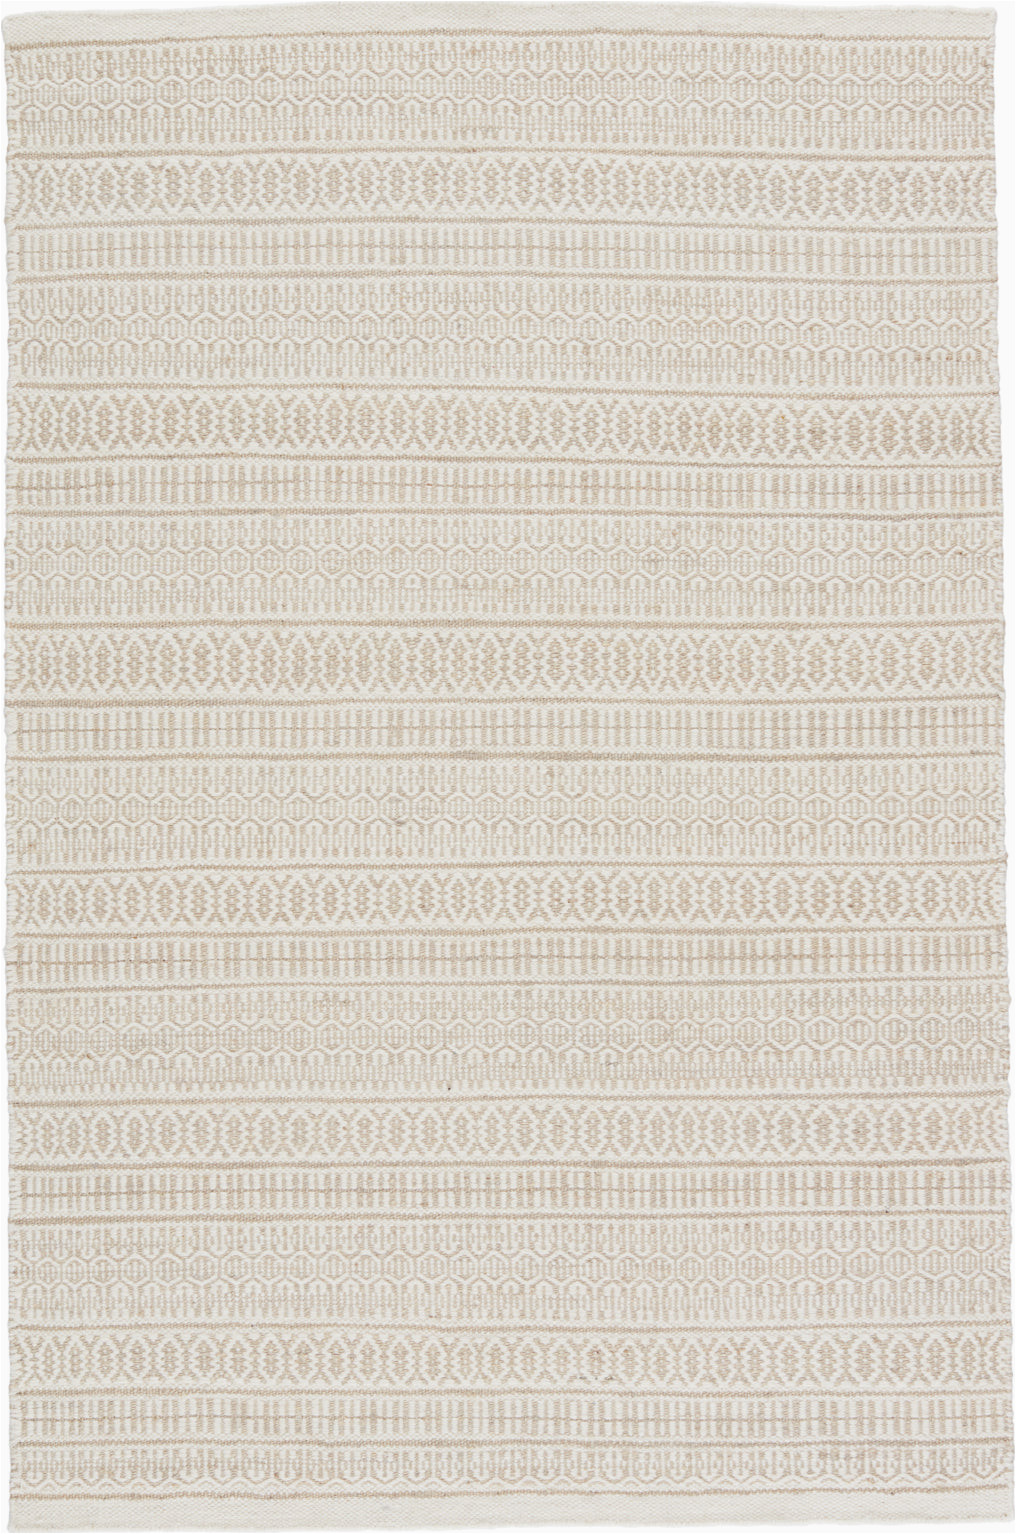 Pittsfield Hand Tufted Wool Cream area Rug Jaipur Living Fontaine Galway Fnt02 Ivory/cream area Rug …